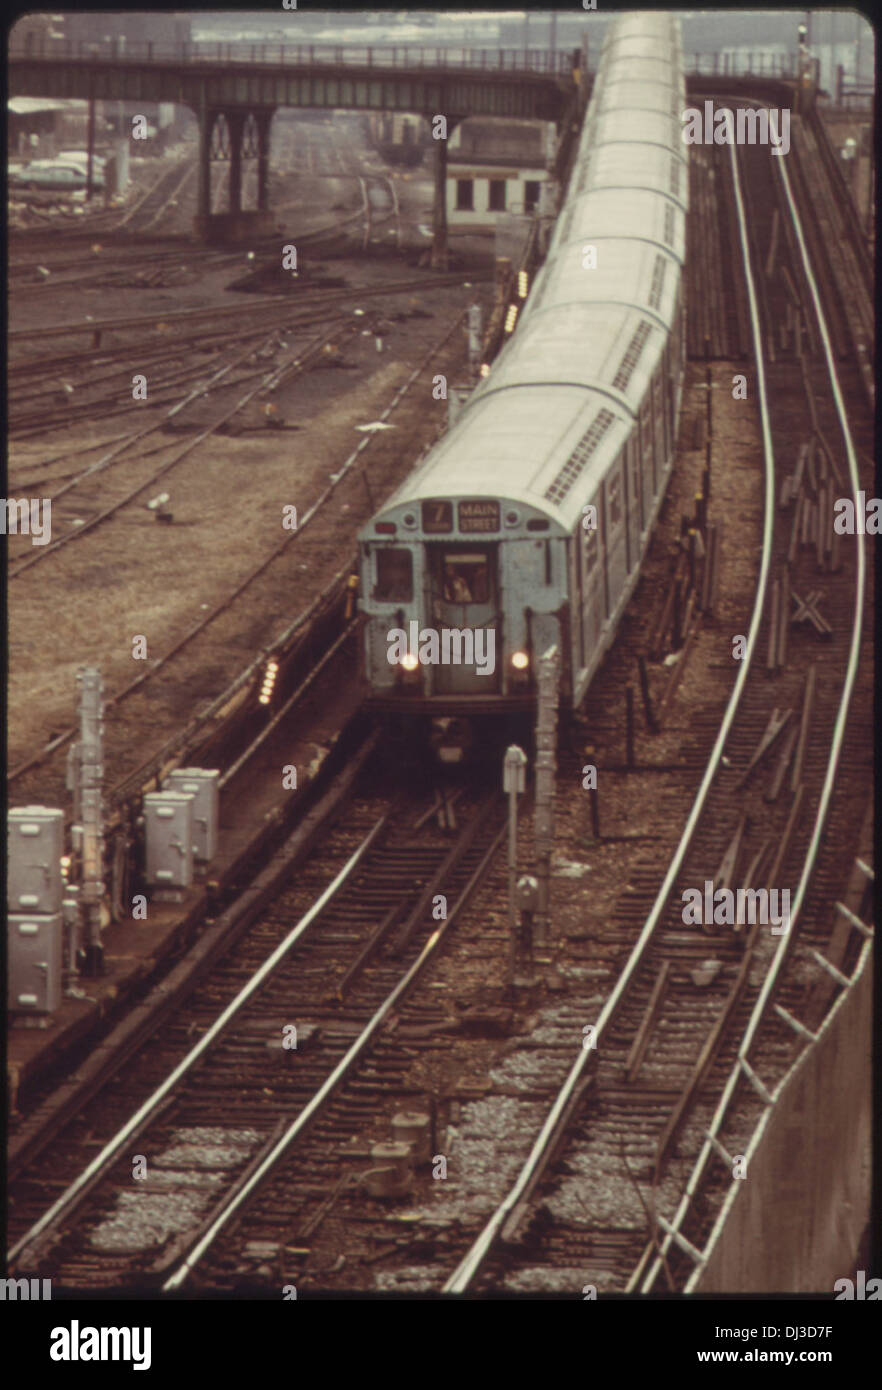 LONG ISLAND COMMUTER TRAIN ARRIVES TO INTERCONNECT WITH NEW YORK TRANSIT AUTHORITY SUBWAYS TO MANHATTAN. THE SUBWAY . 693 Stock Photo